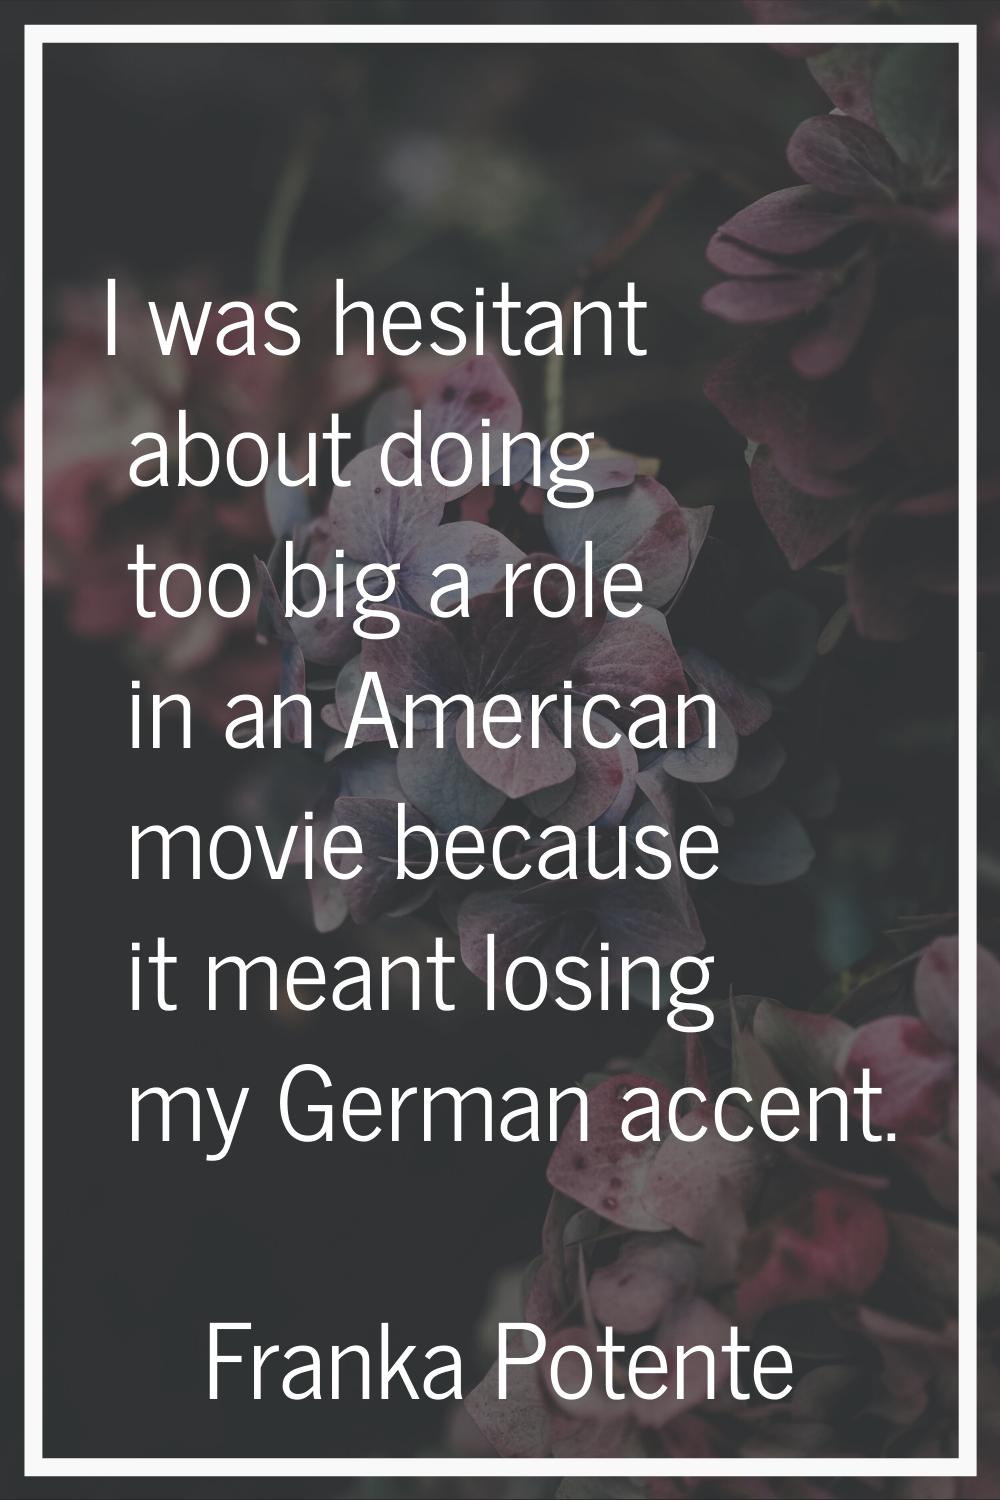 I was hesitant about doing too big a role in an American movie because it meant losing my German ac